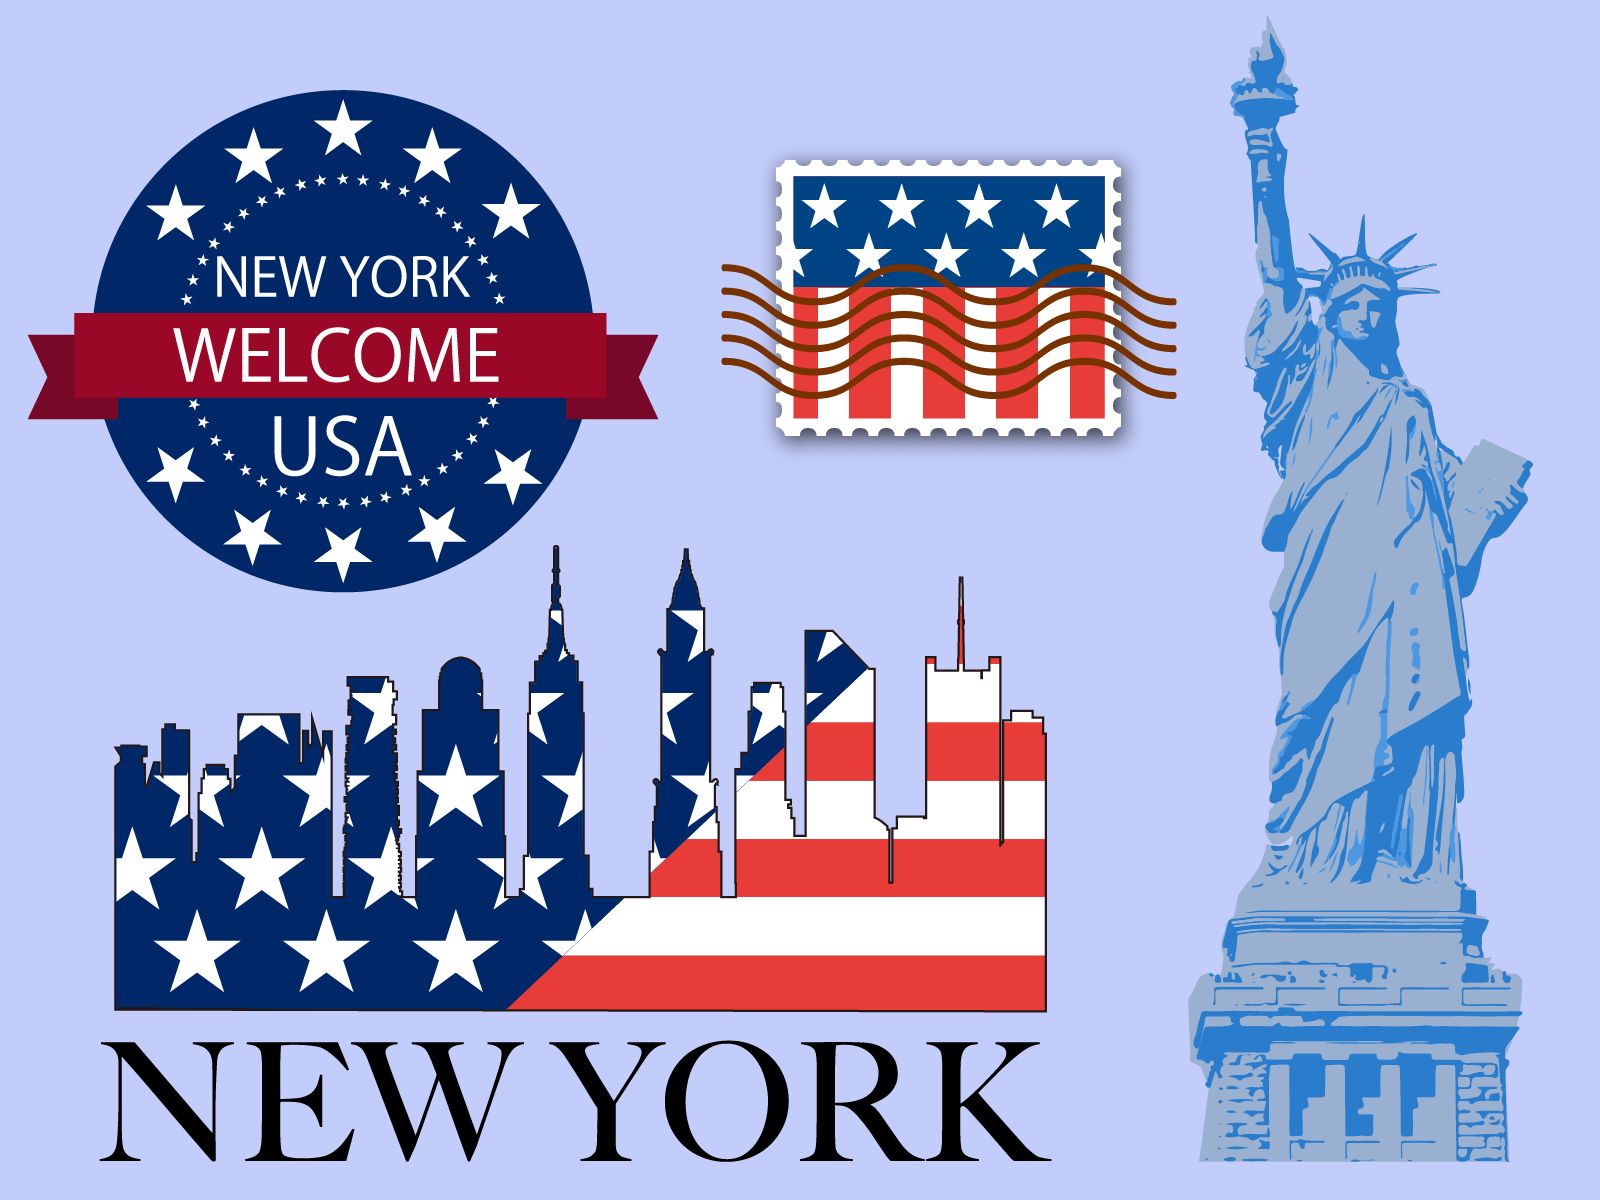 10+ Free Royalty-Free New York Illustrations for Download